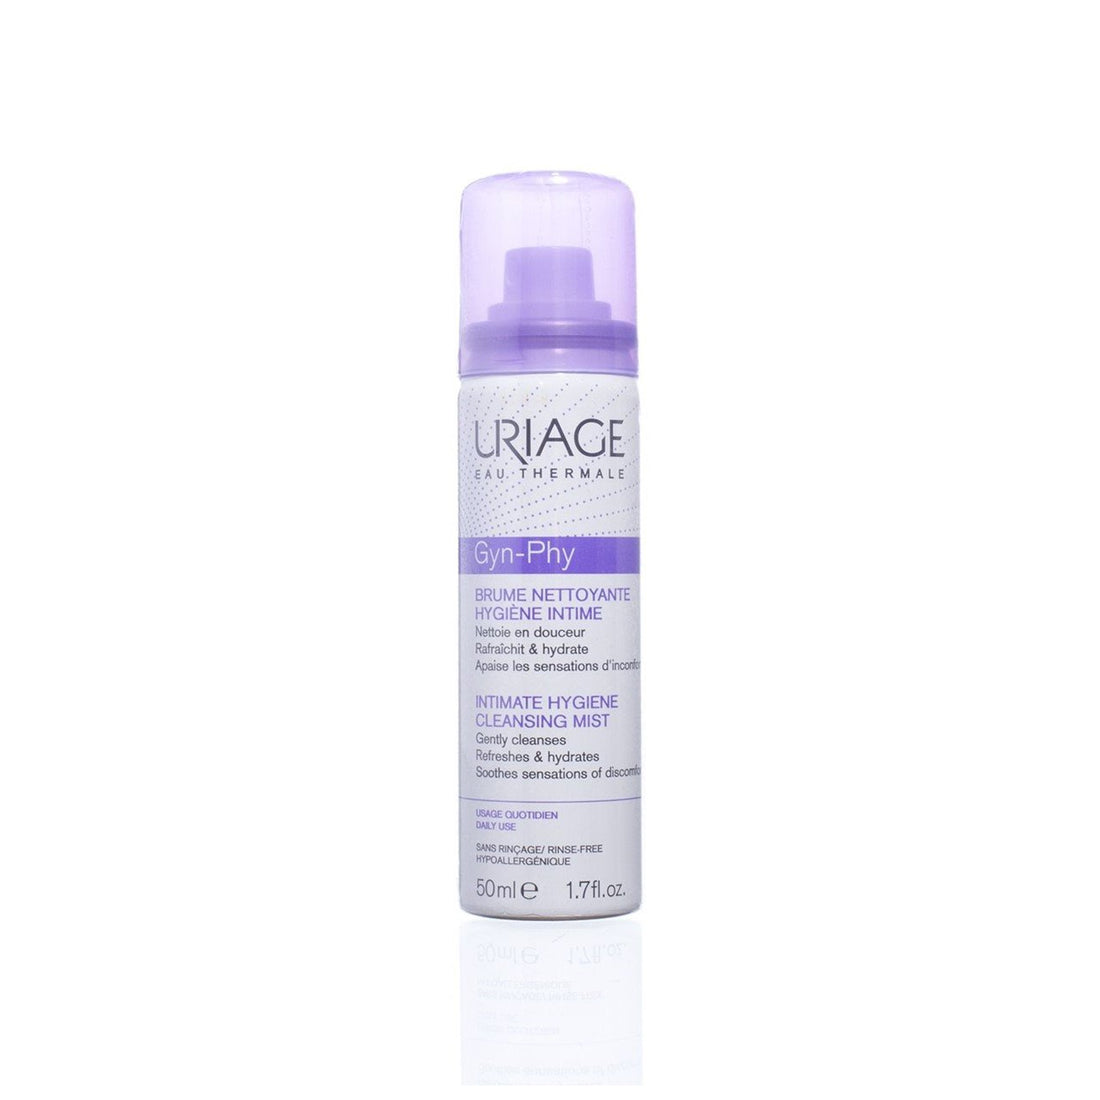 Uriage Gyn-Phy Cleansing Mist 50ml